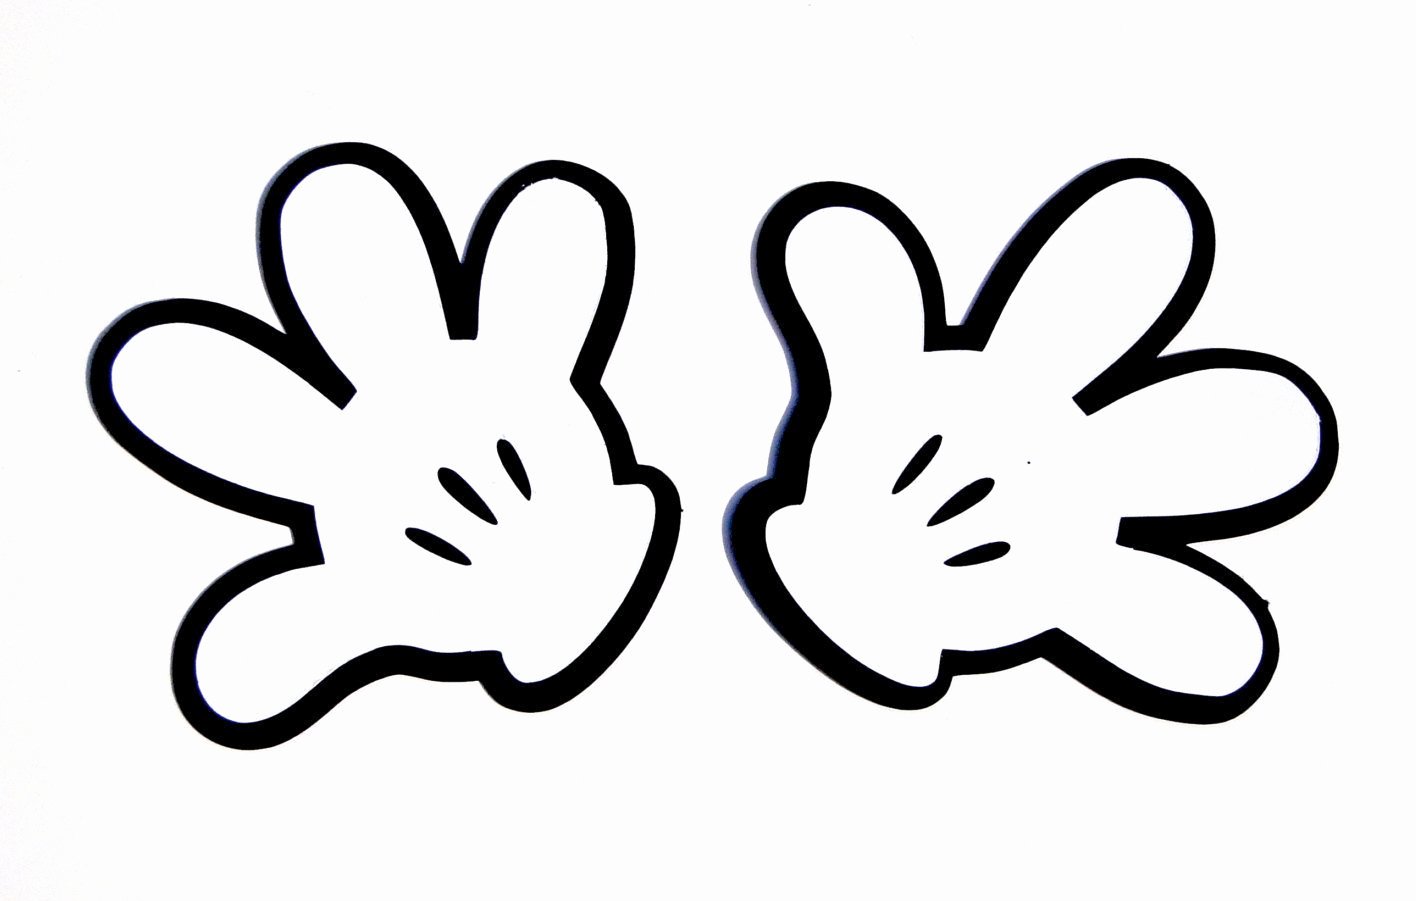 Minnie Mouse Hands Template Luxury Minnie Mouse Hands Google Search